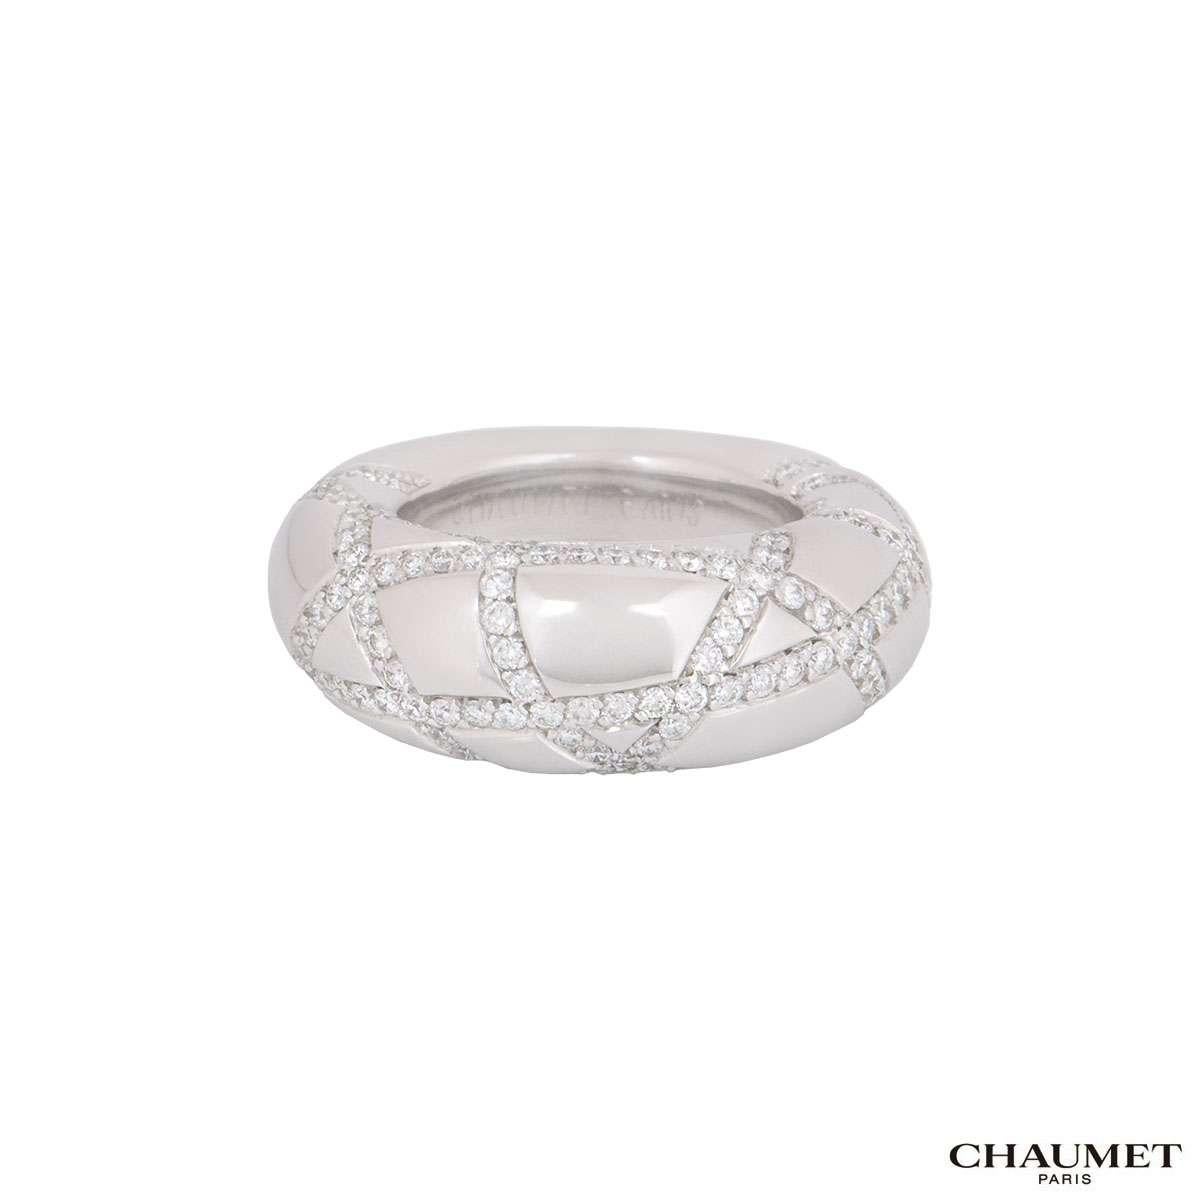 An 18k white gold diamond dress ring by Chaumet. The ring features a round brilliant cut diamond set crossover pattern. The diamonds have a total weight of approximately 1.20ct, G+ colour and VS+ clarity. The ring measures 9mm in width, is a size UK